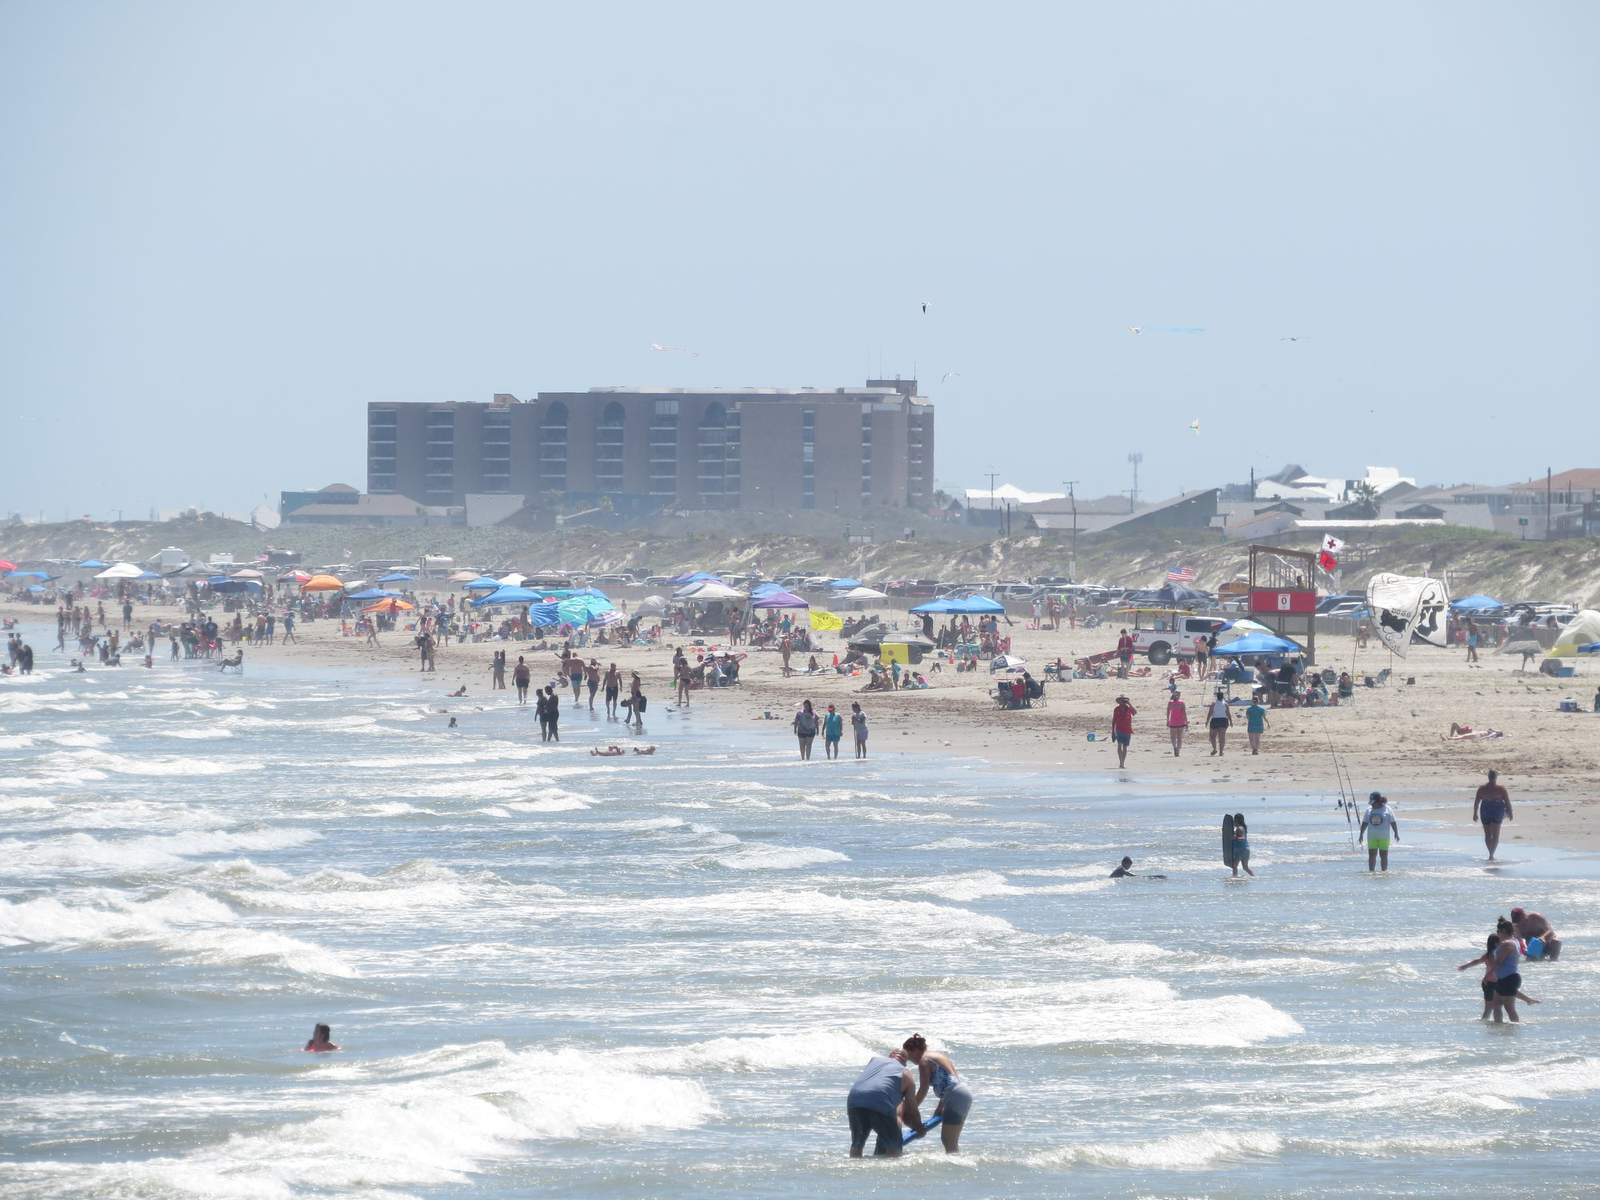 ‘I was shocked’: Port Aransas photographer captured images of a crowded beach. Then came the hate mail